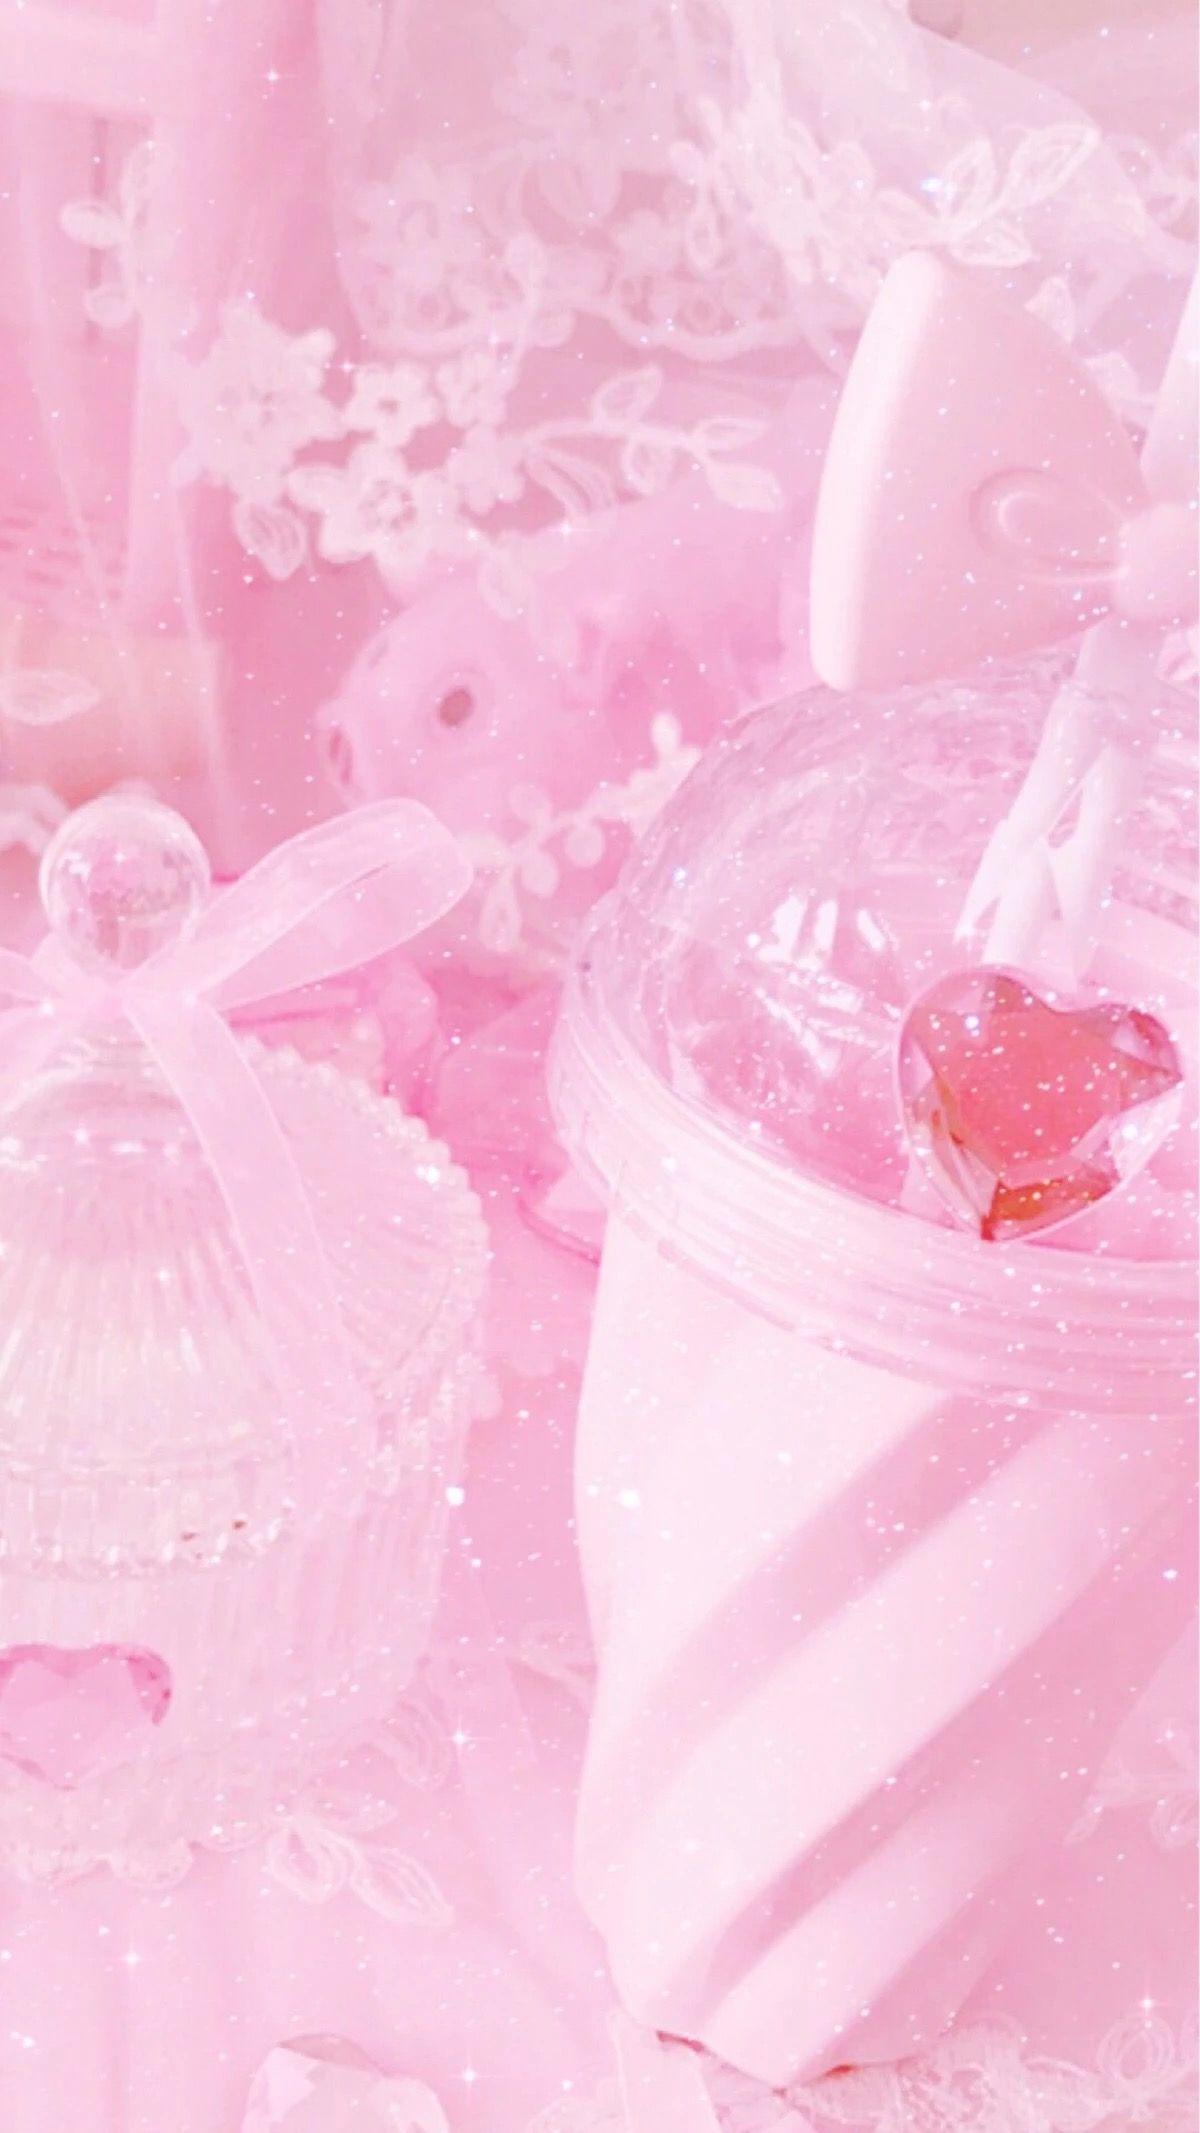 Pink Aesthetic Background Wallpaper / Cool Aesthetic Pics 1080p ...